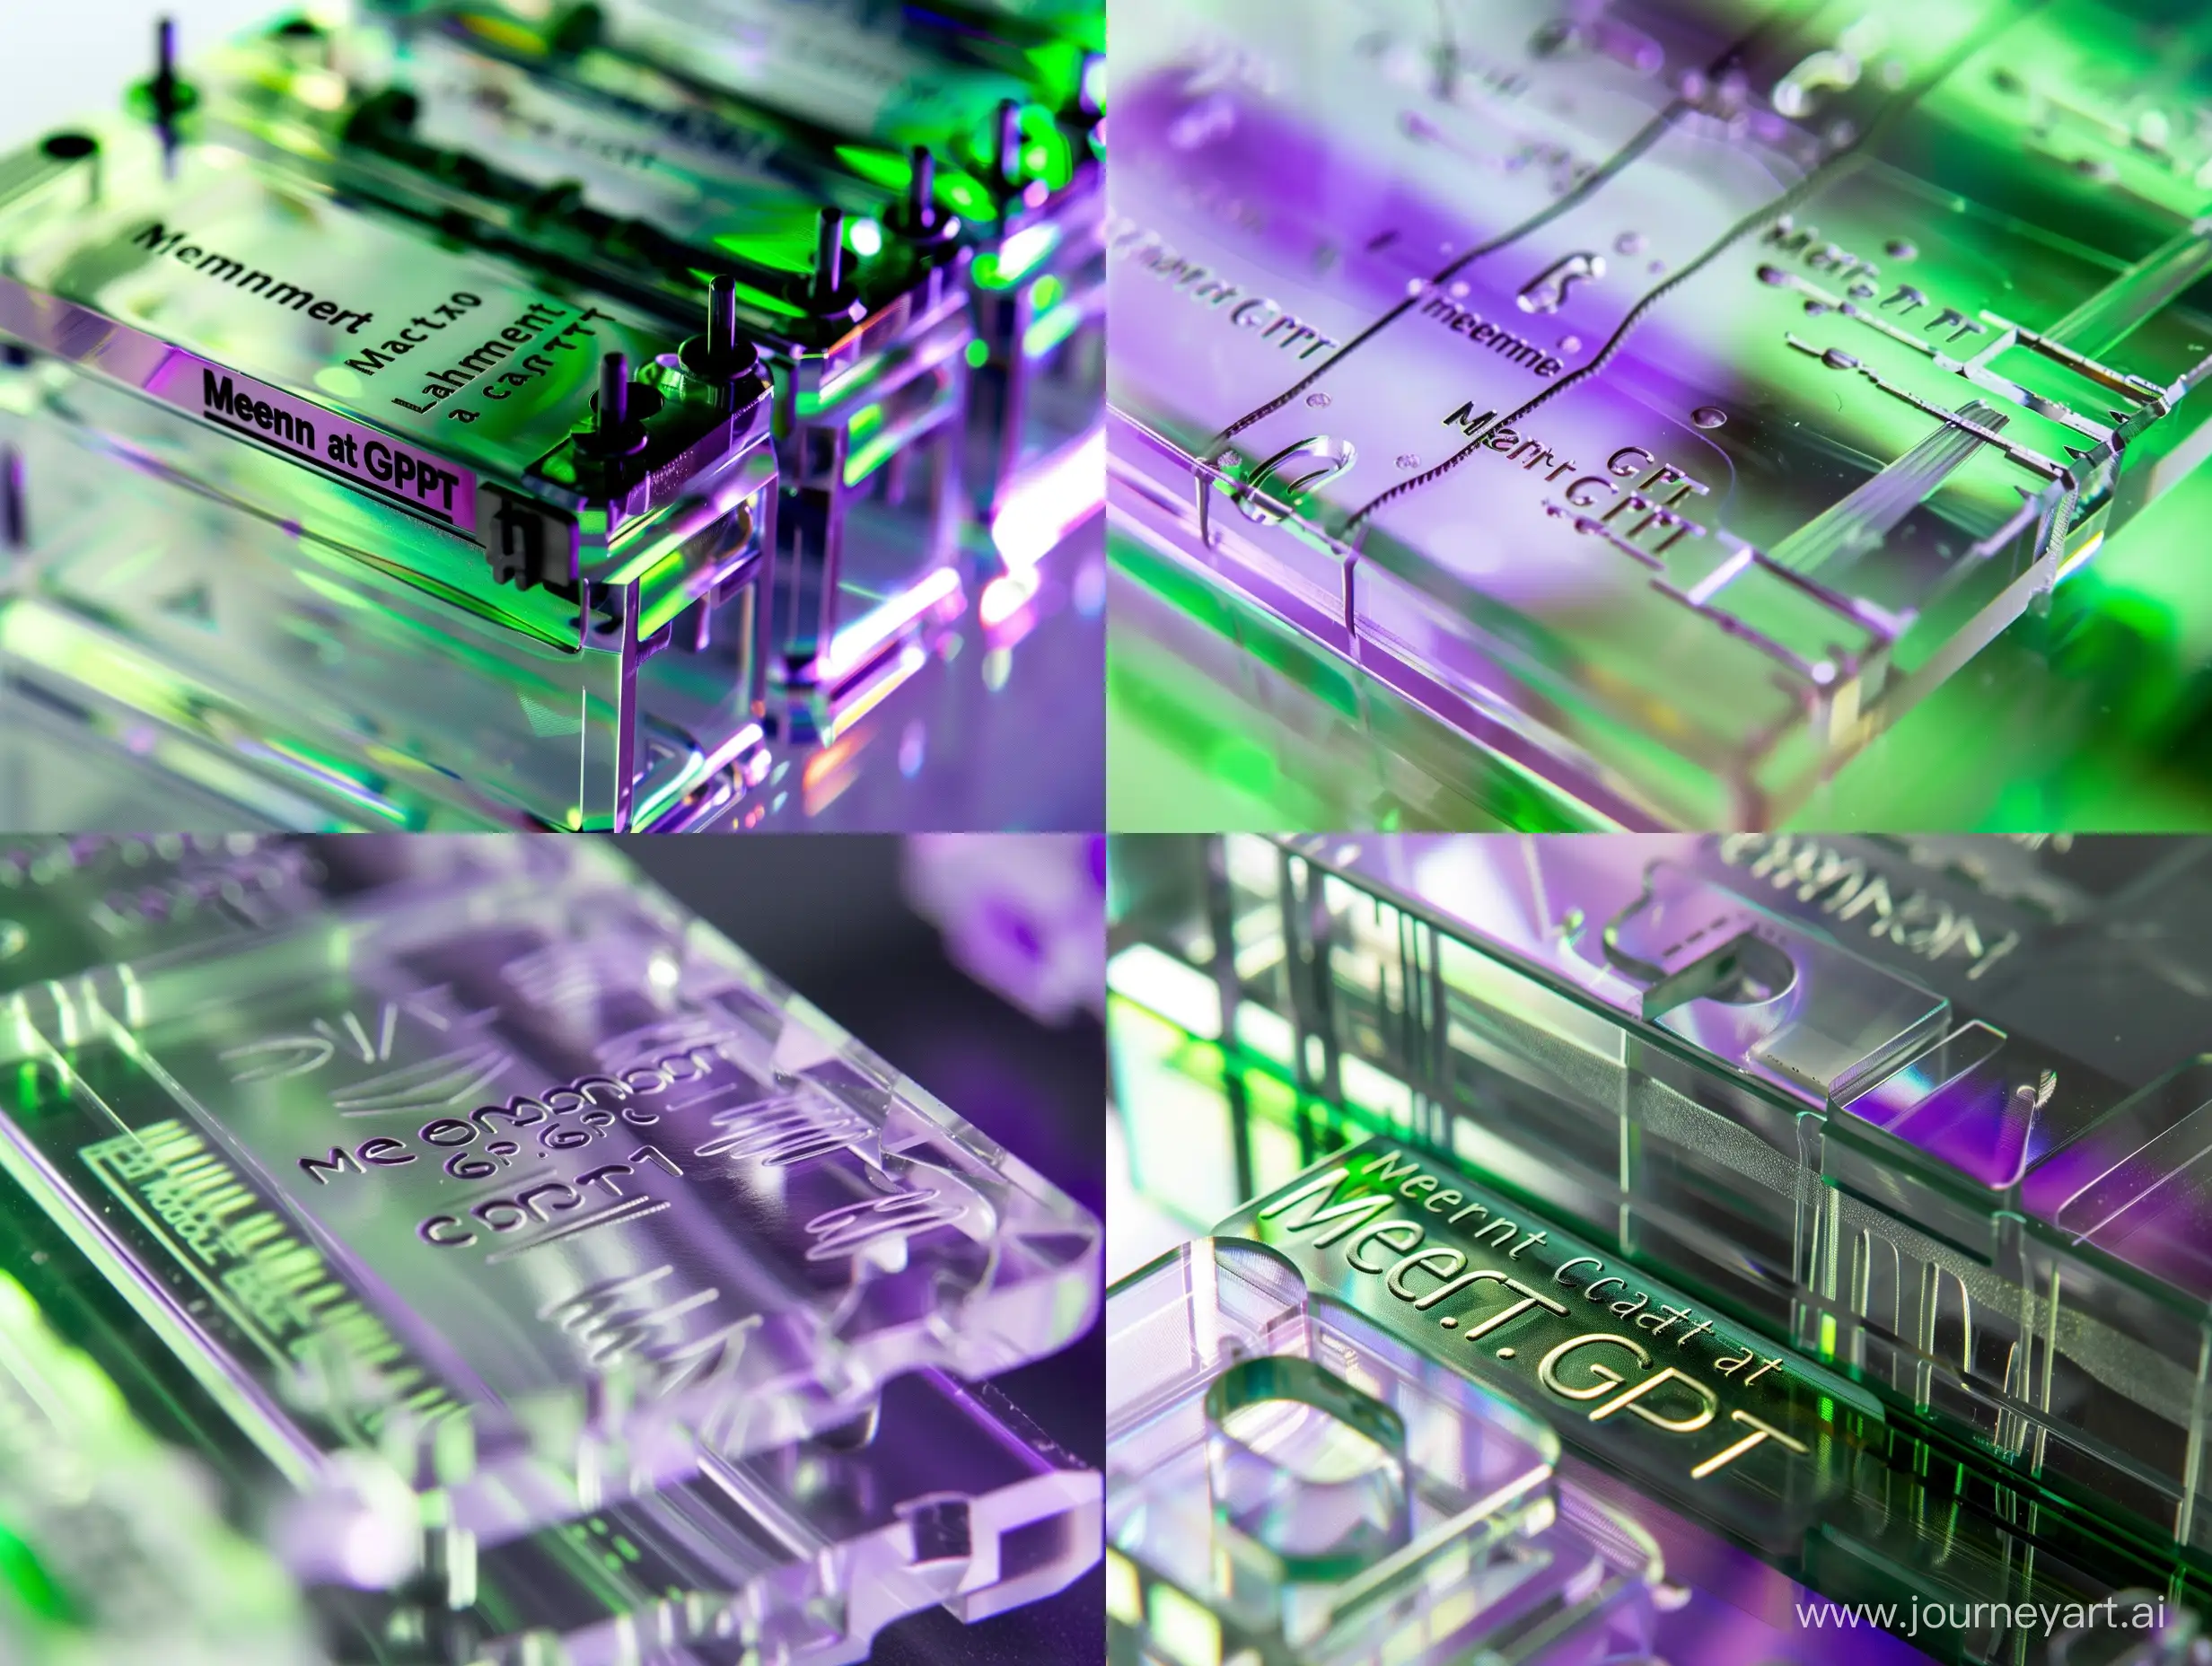 Transparent-Electronic-Cell-with-Engraved-Inscription-Memory-at-ChatGPT